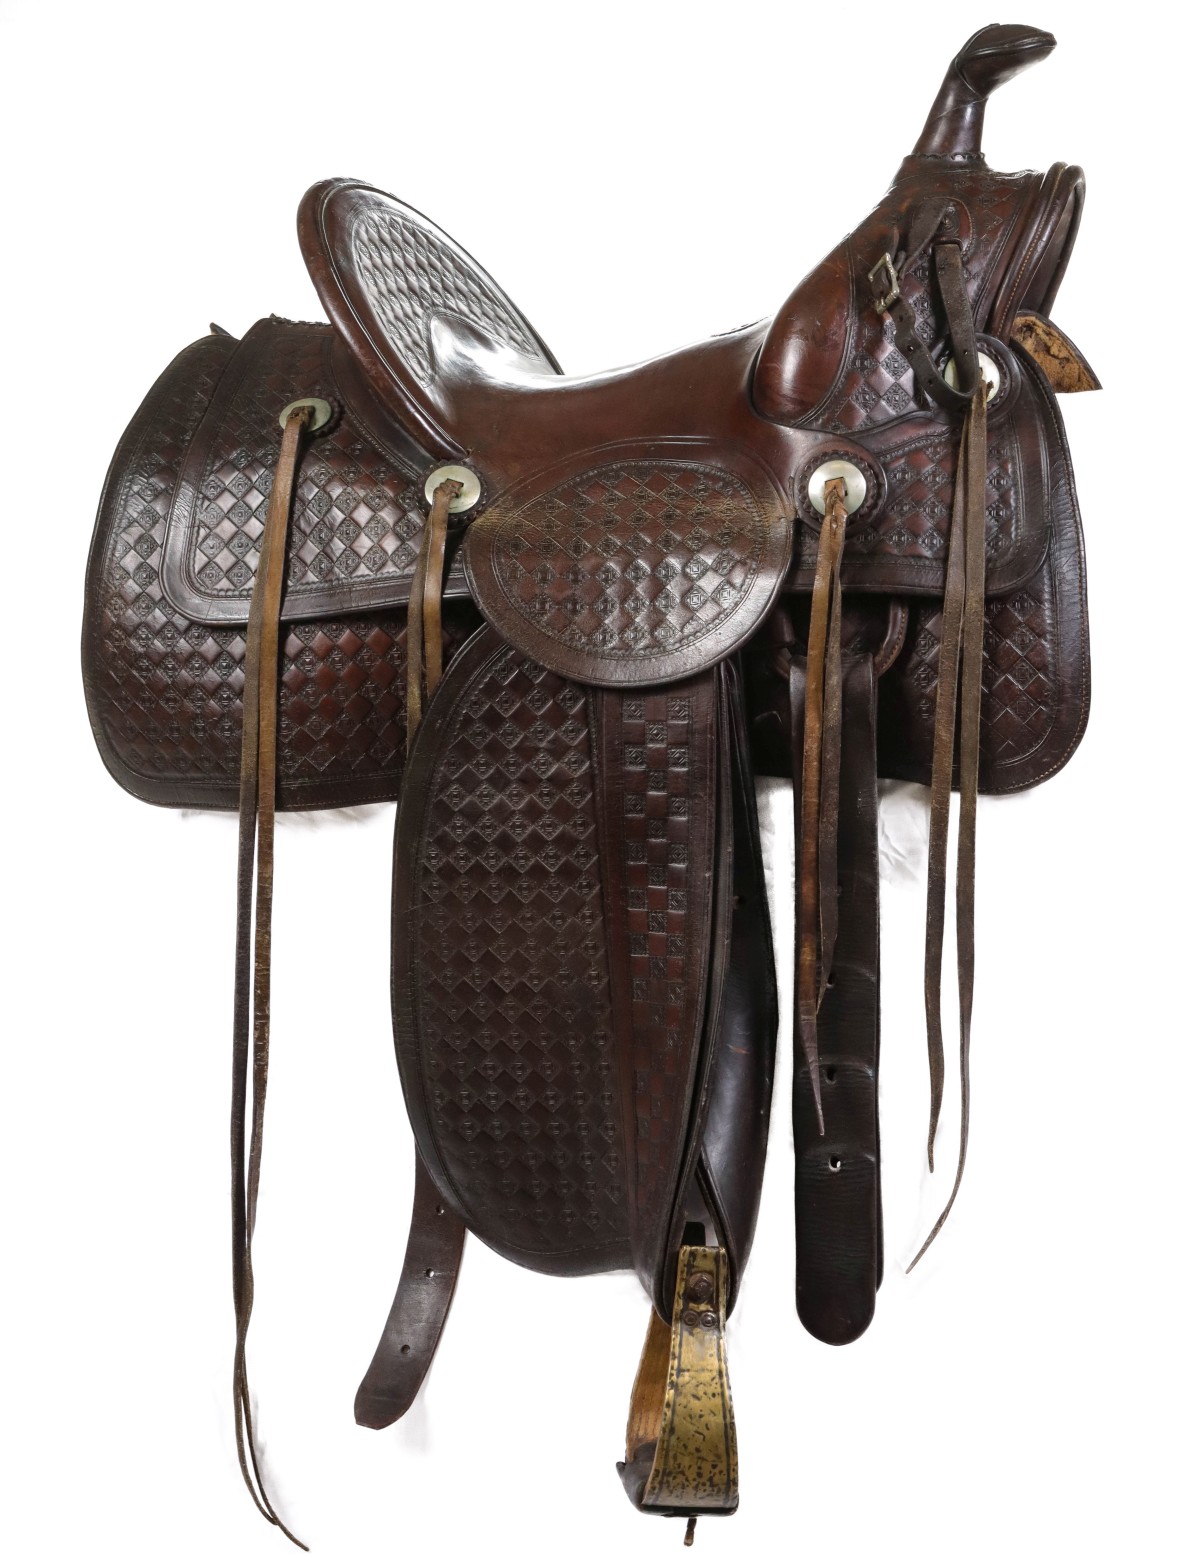 A HANDSOME EARLY HIGH BACK SADDLE STAMPED C. P. SHIPLEY